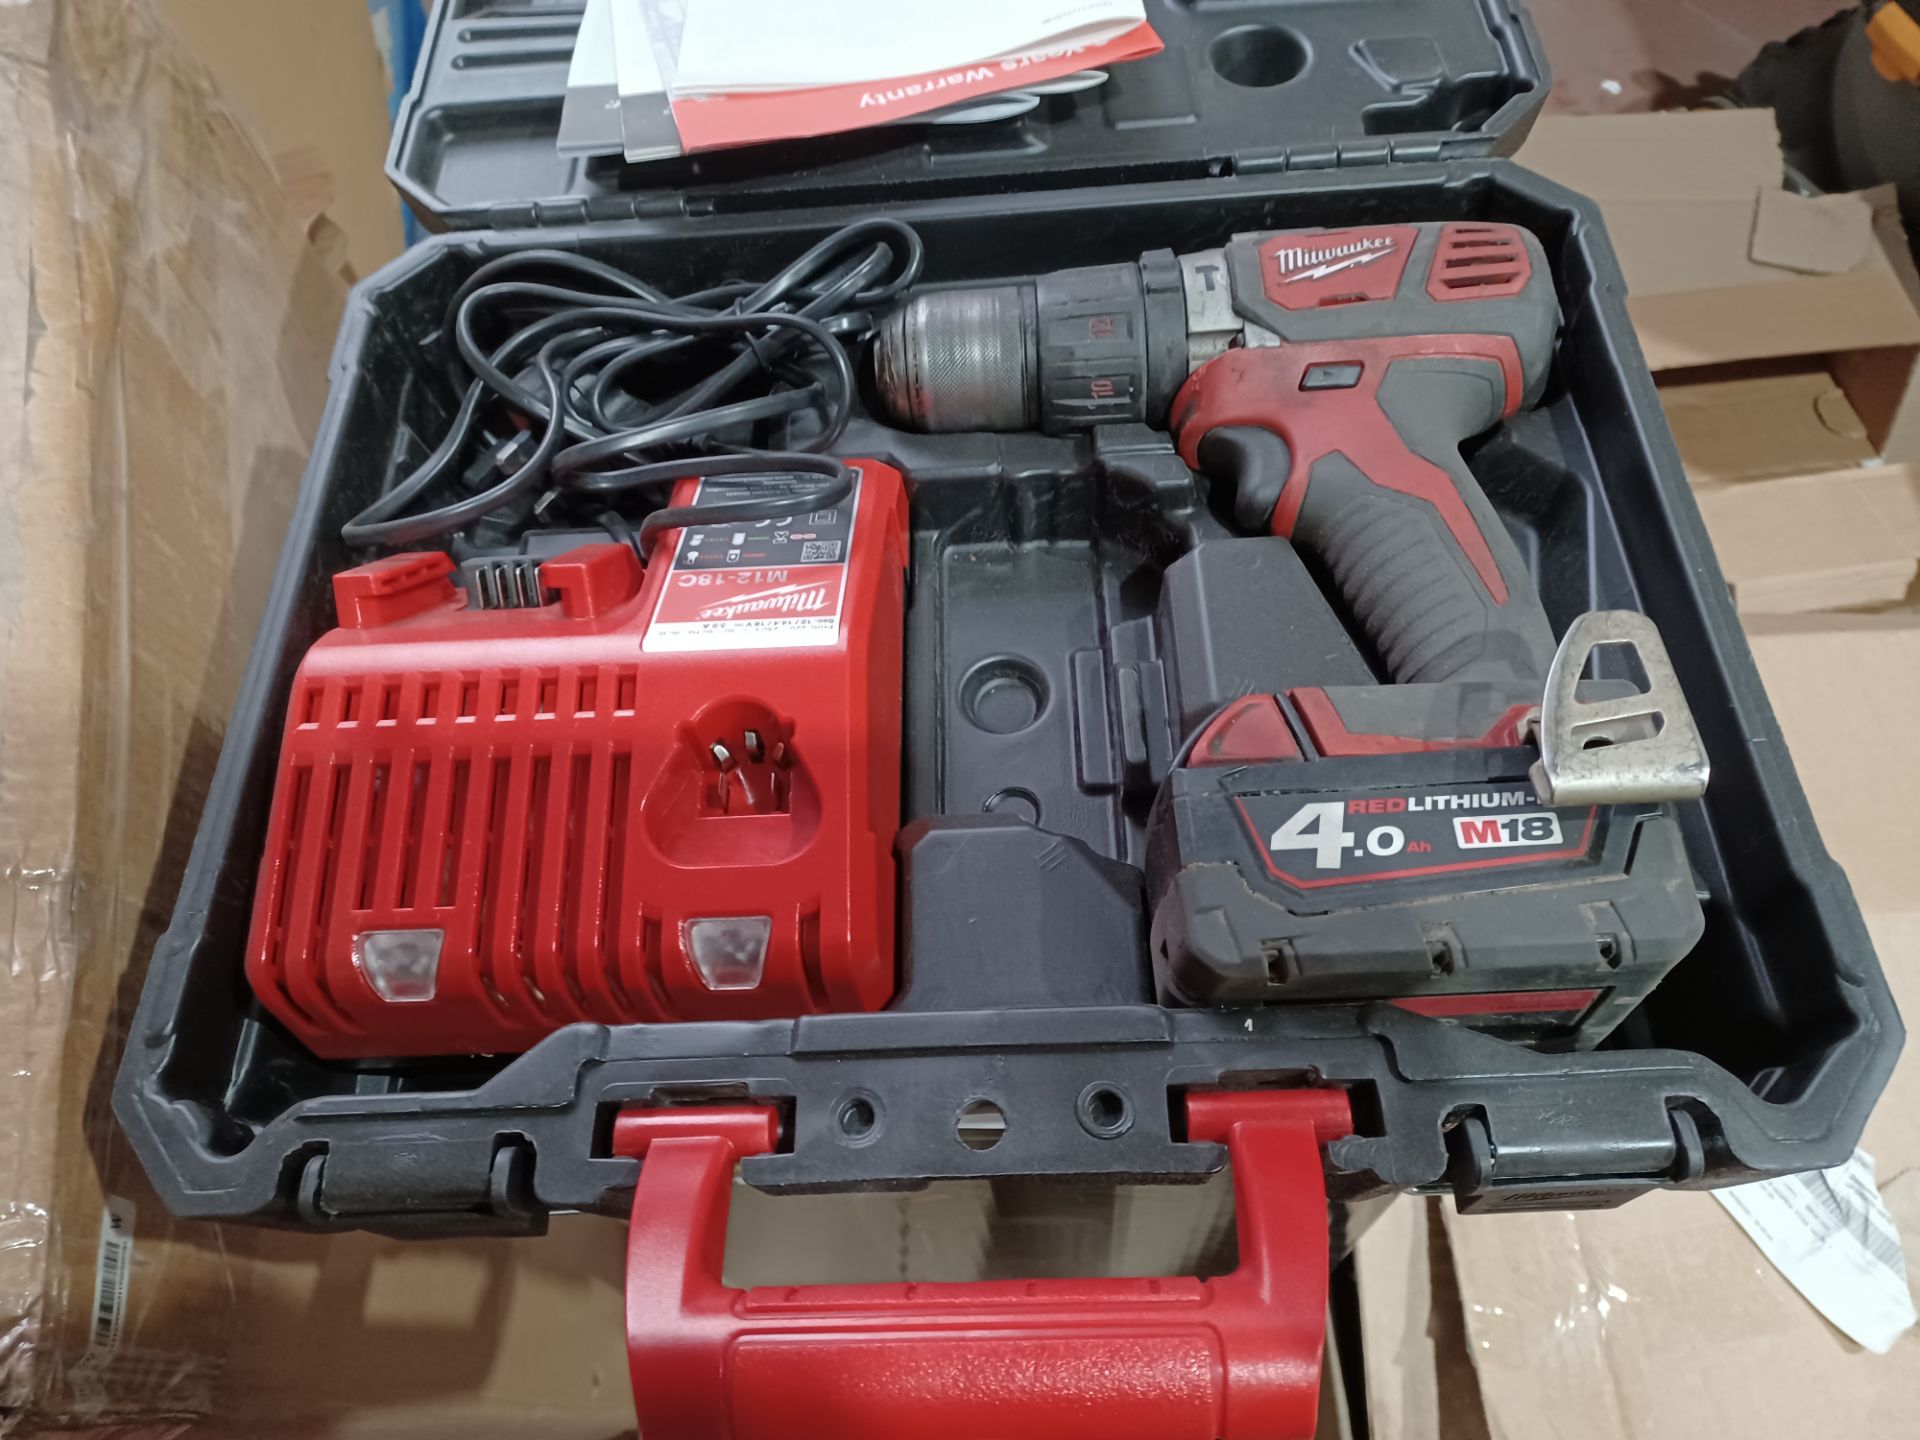 MILWAUKEE M18 BPDN-402C 18V 4.0AH LI-ION REDLITHIUM CORDLESS COMBI DRILL WITH BATTERY CHARGER AND